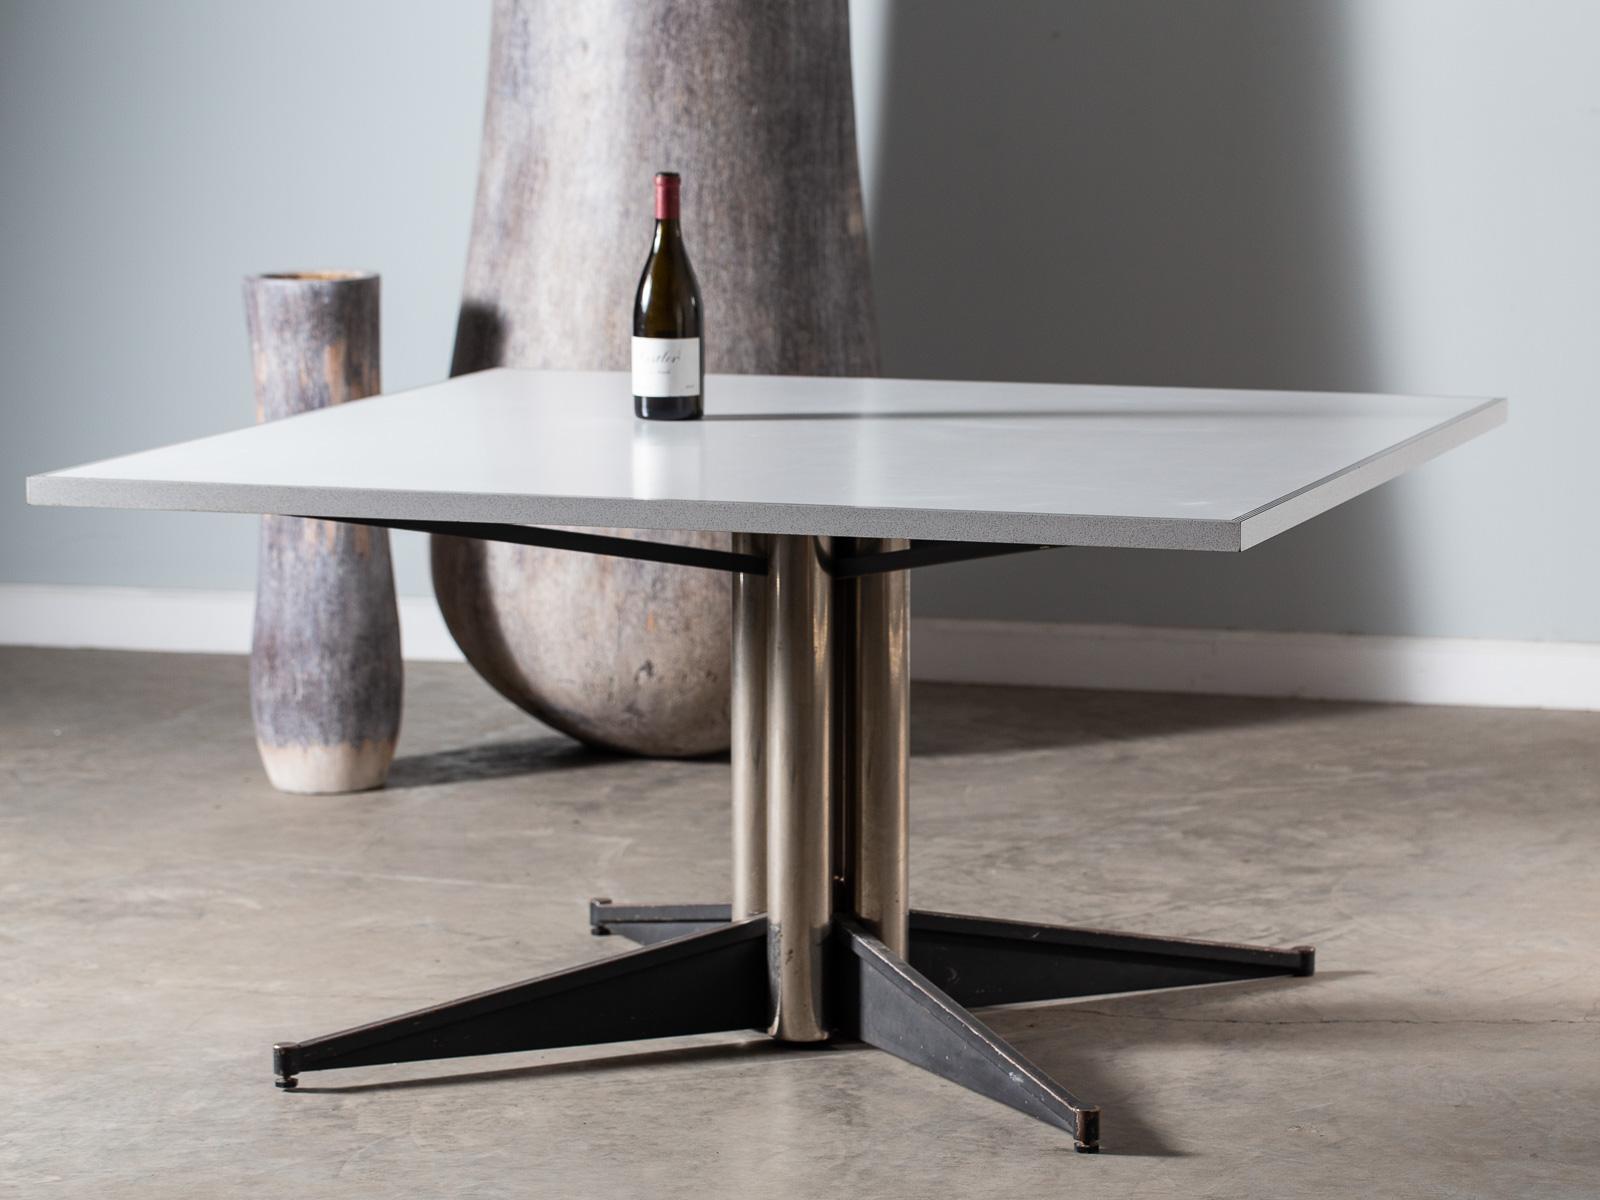 A vintage Italian Mid-Century Modern square steel base table, circa 1950. The cool Silhouette of the base on this table has four stainless steel cylinders surrounding the support shaft and stands on four modern horizontal legs. Seen from any